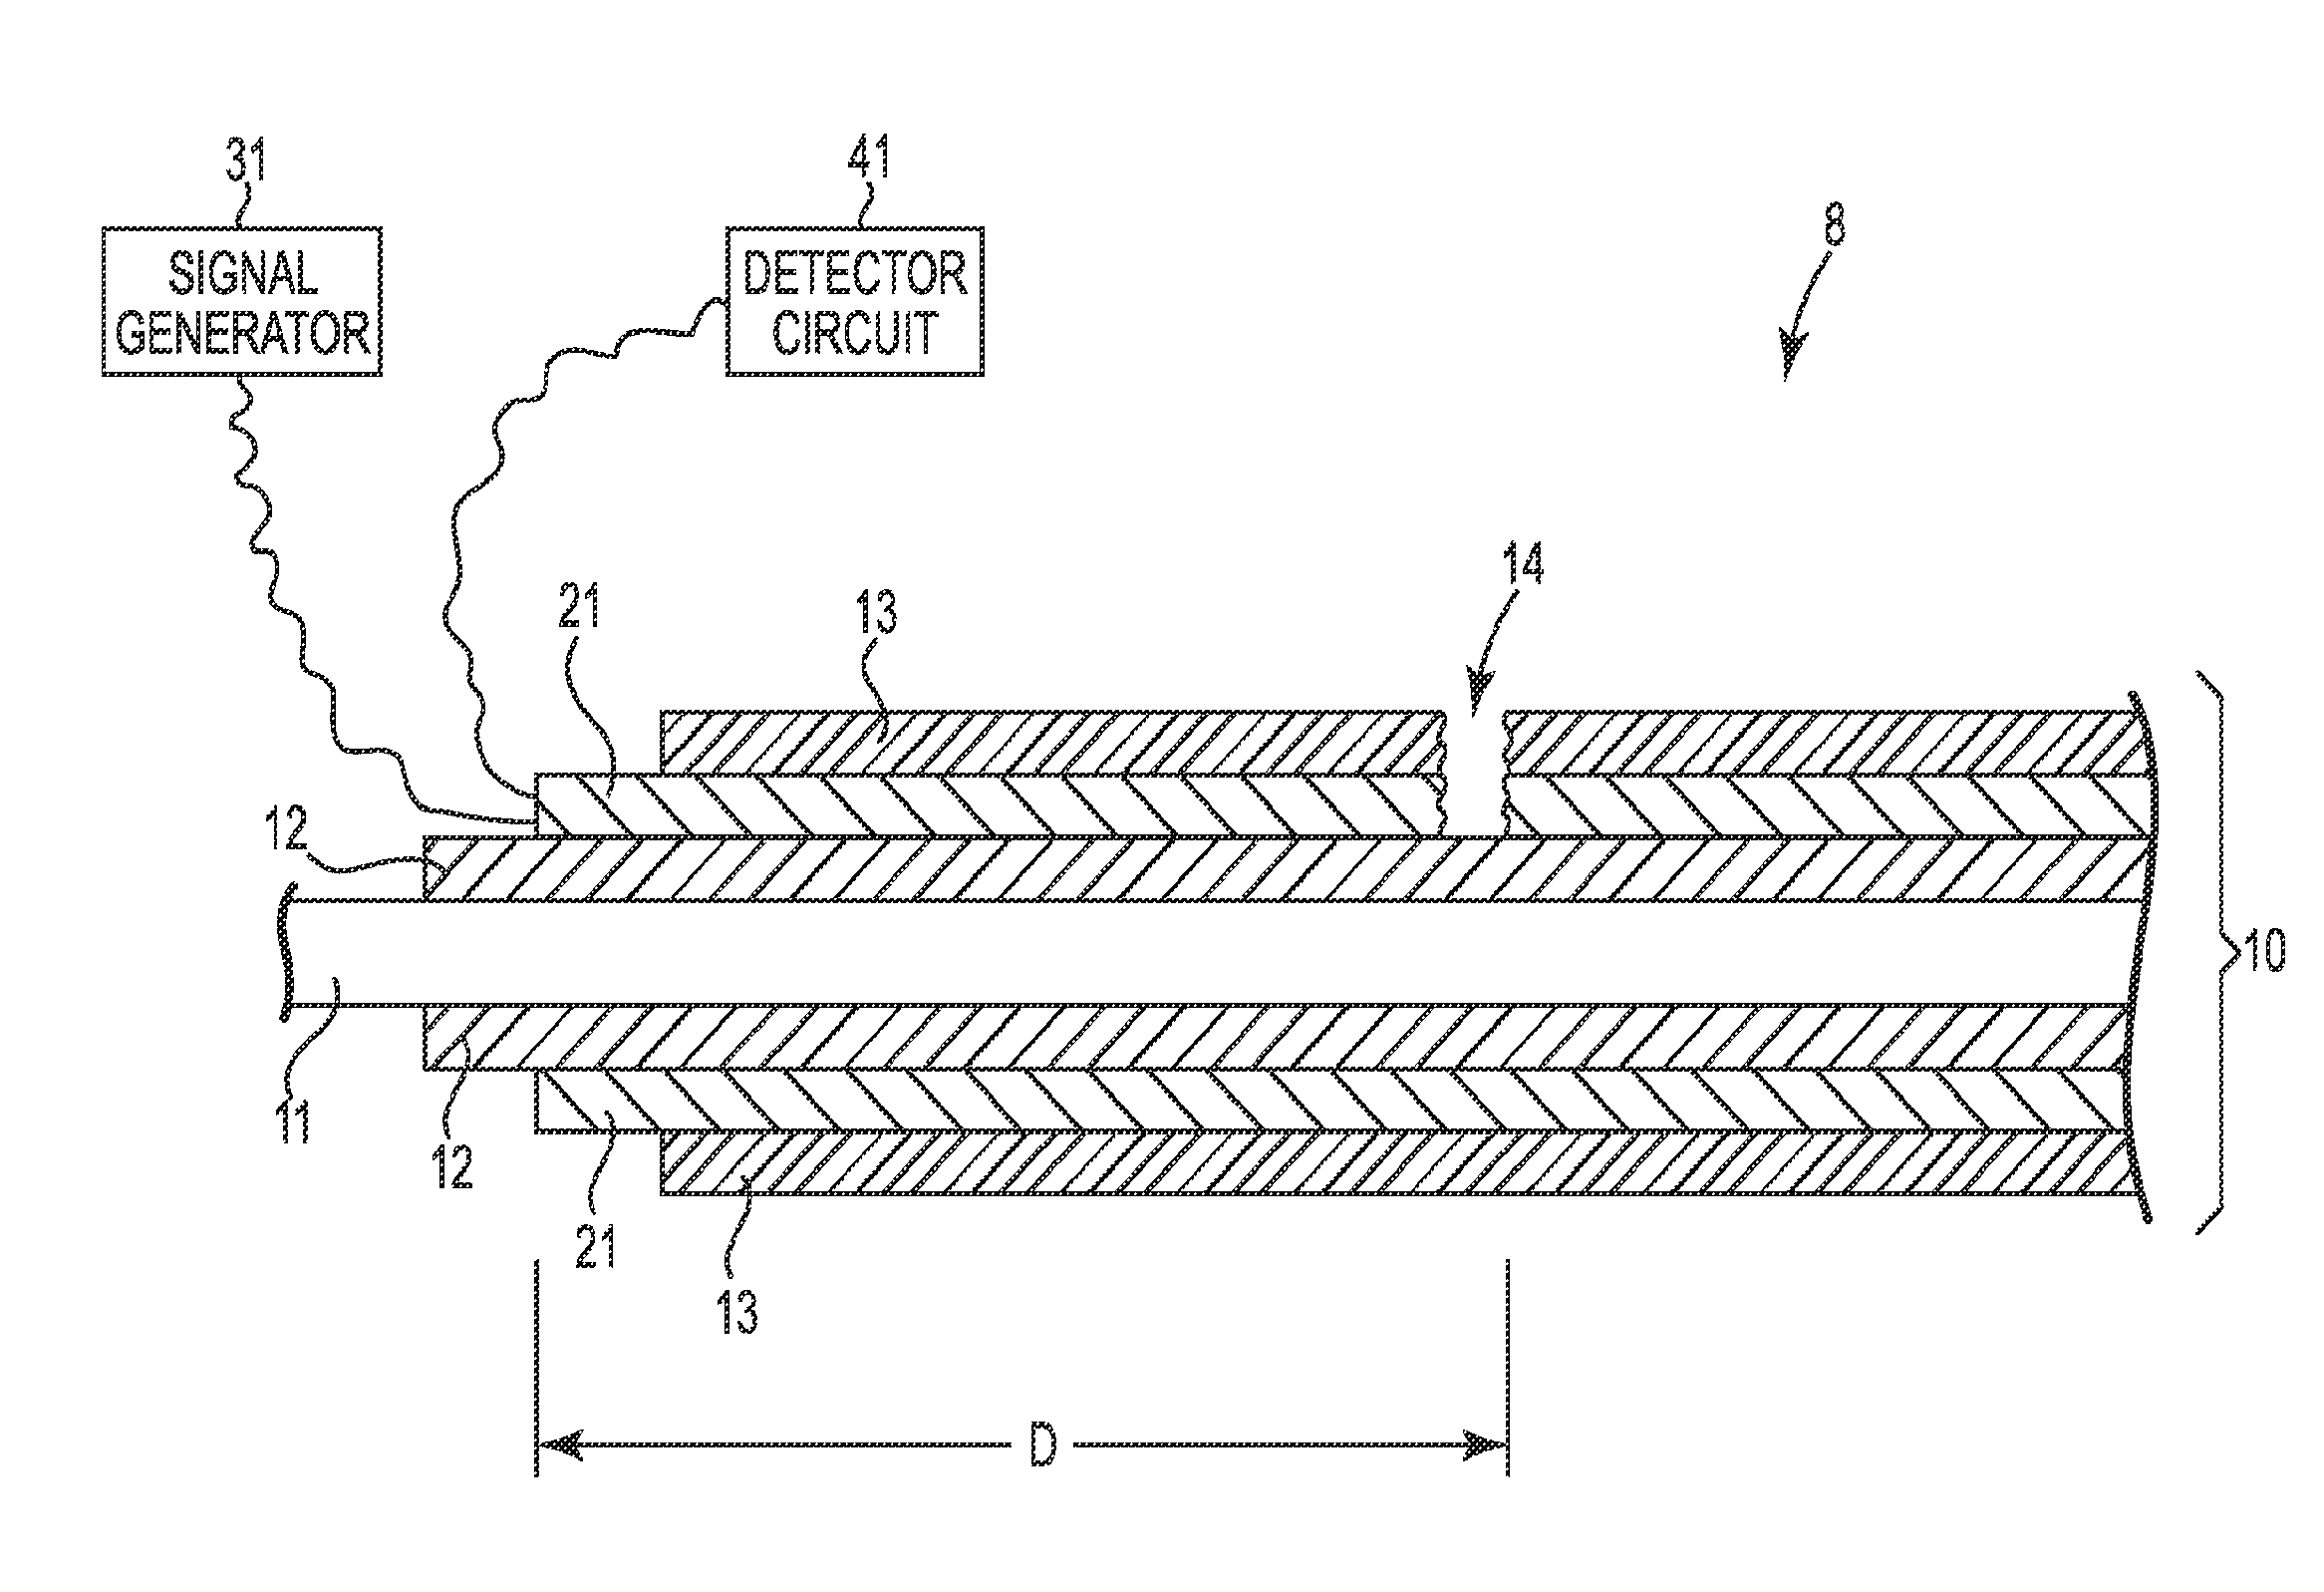 Method of fault detection and rerouting